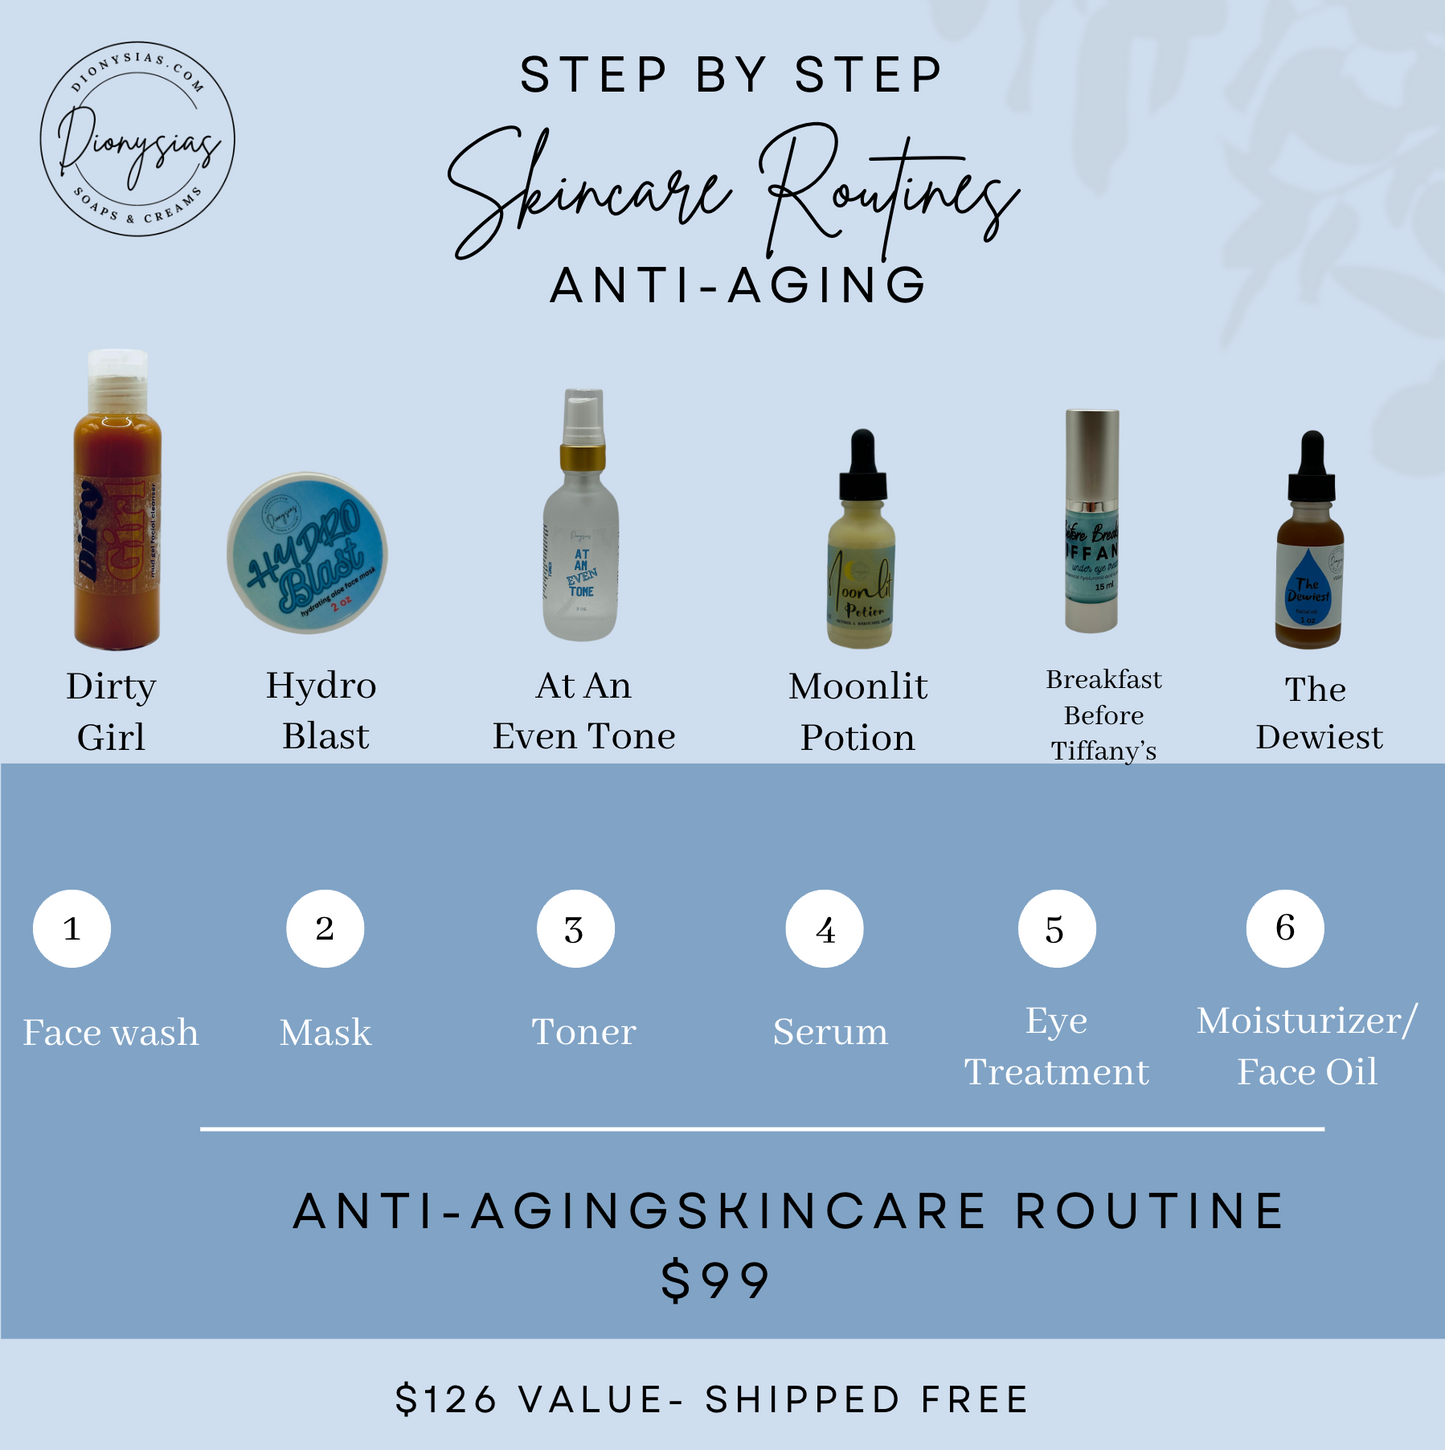 Skin Care Routine for Anti-Aging